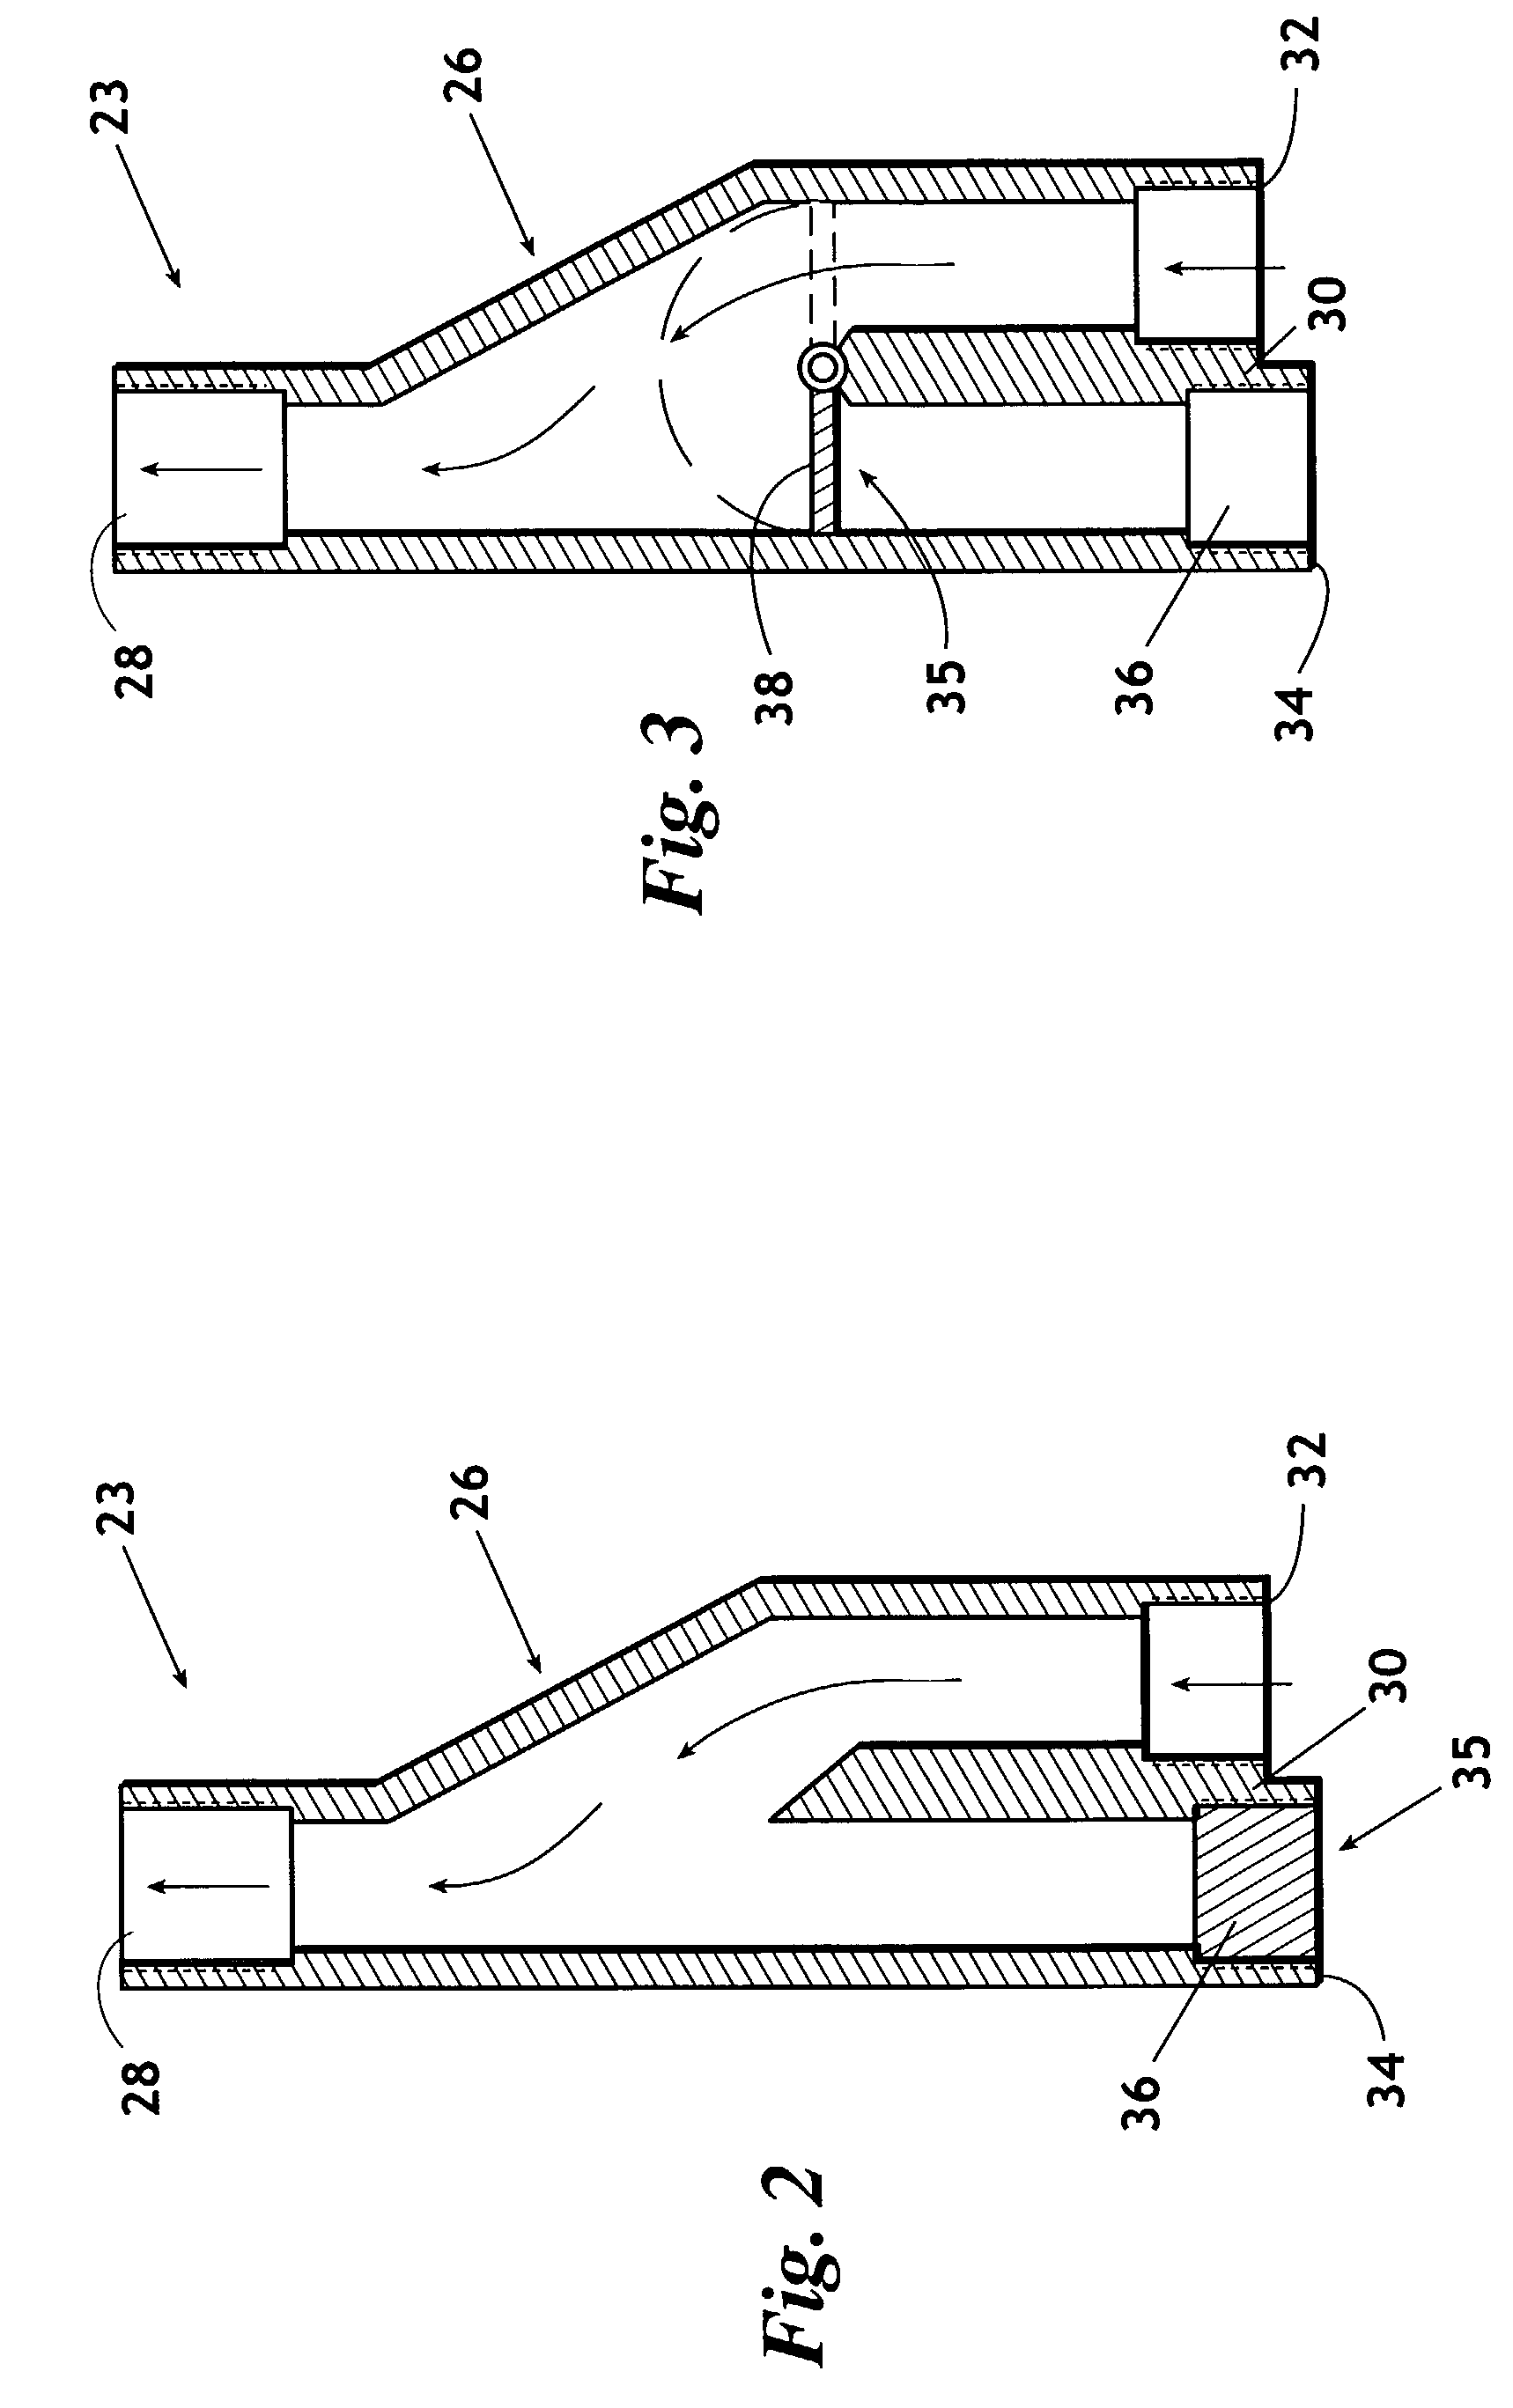 Protection scheme and method for deployment of artificial lift devices in a wellbore